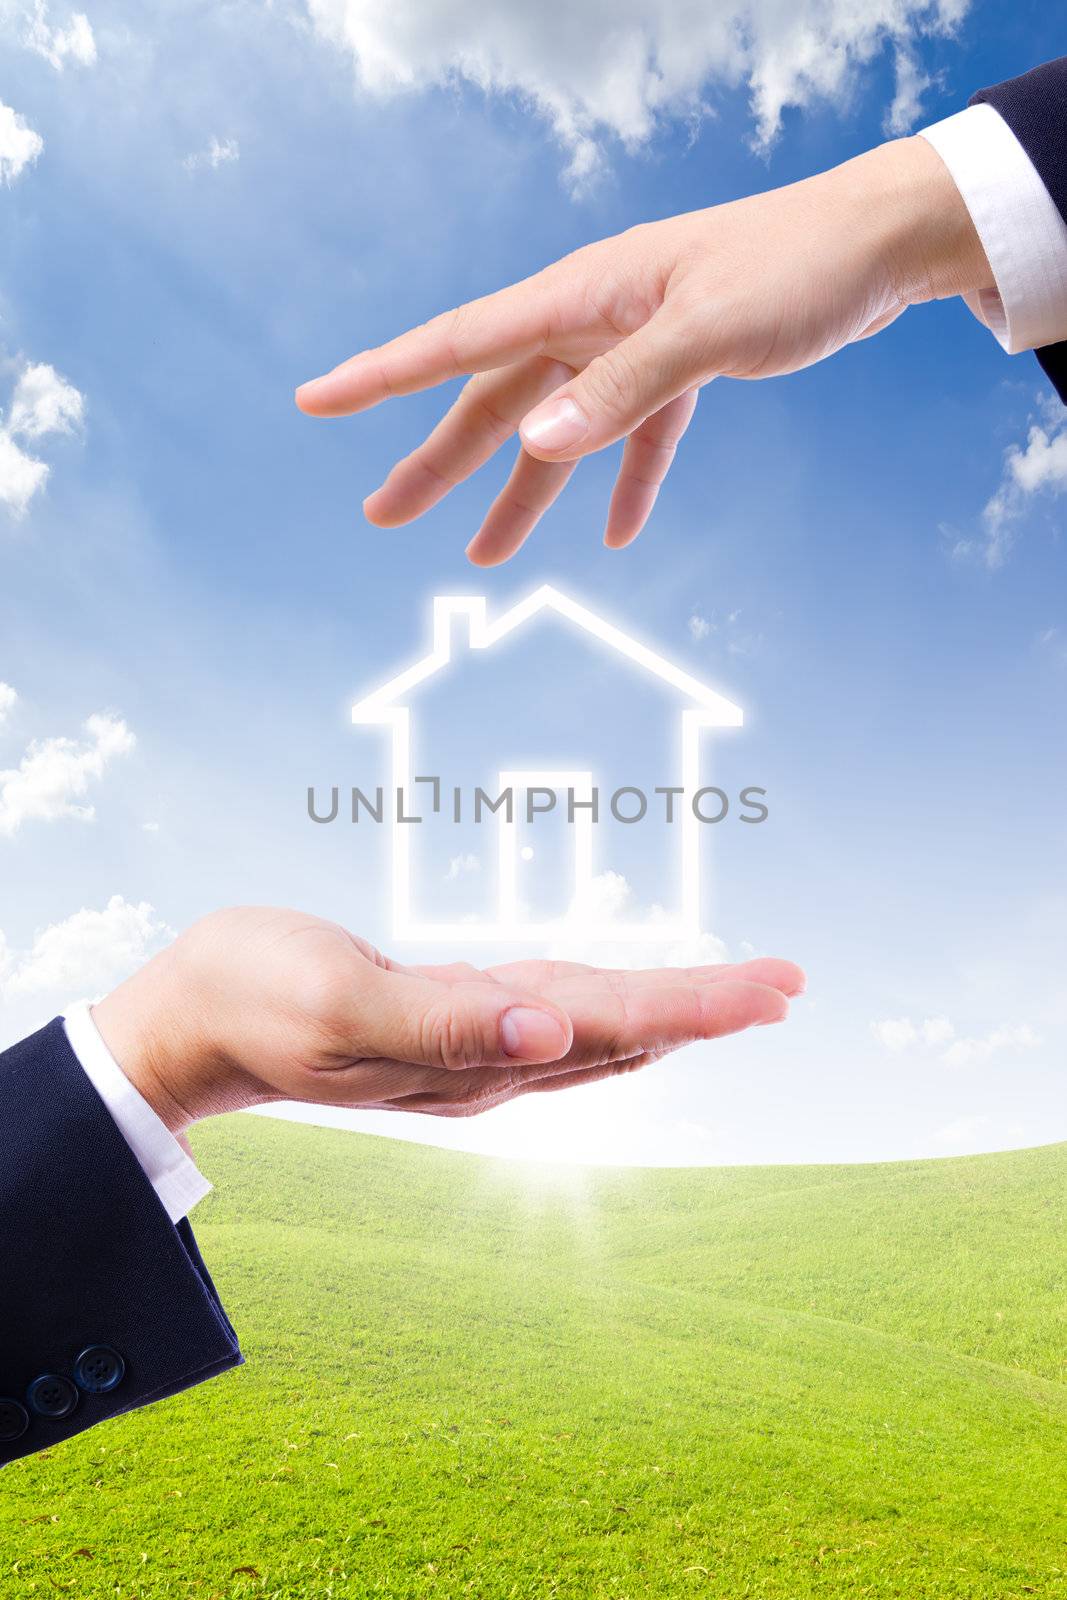 house icon on hand by tungphoto